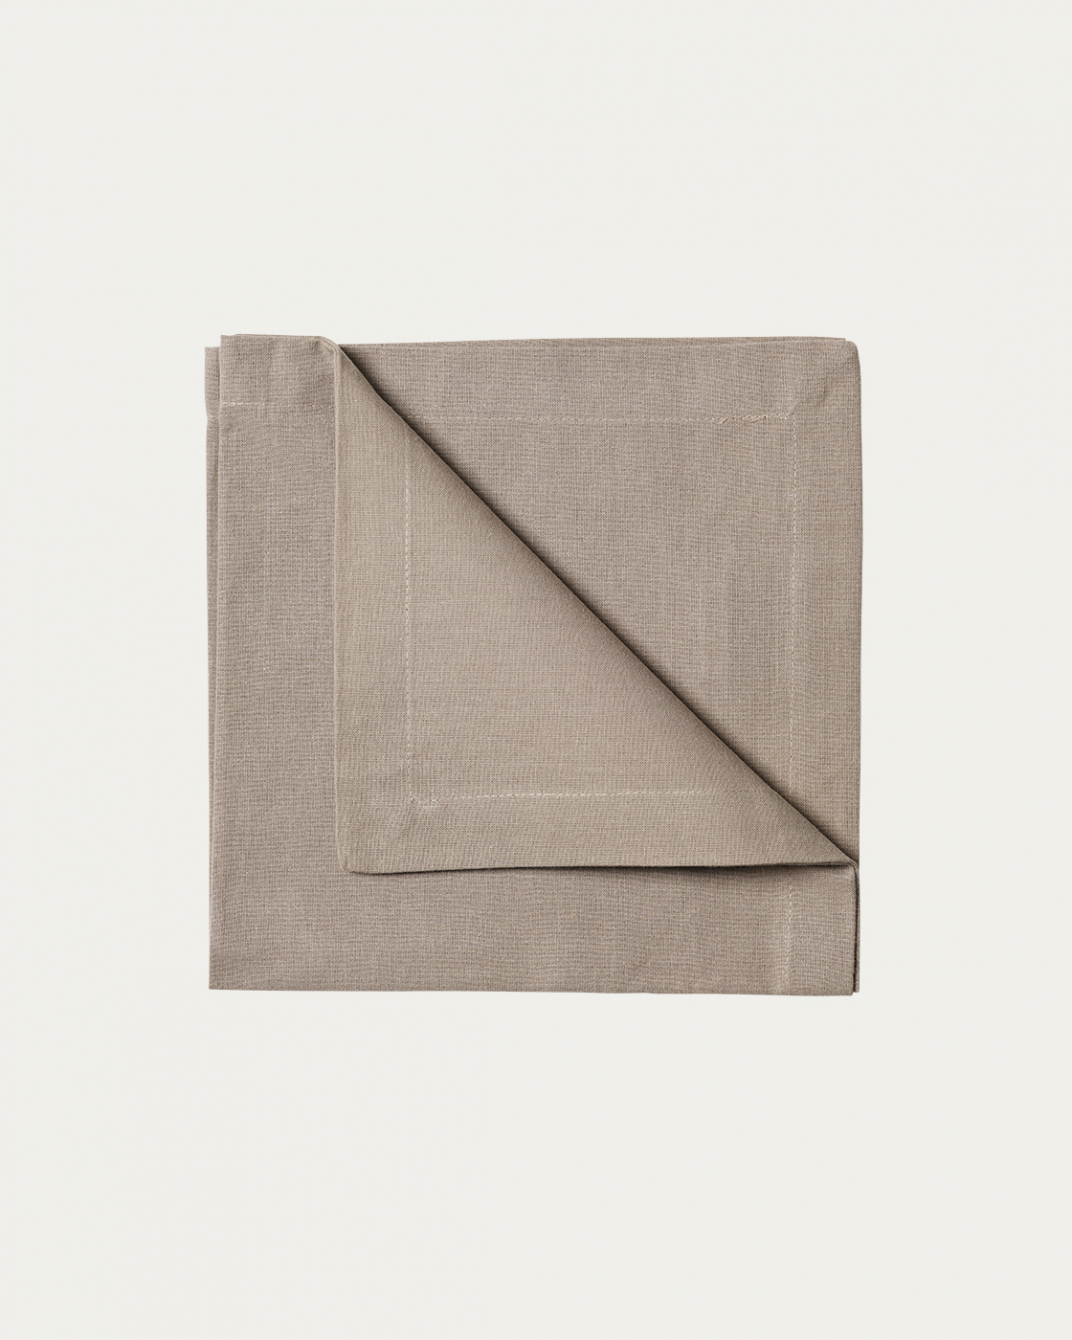 Product image mole brown ROBERT napkin made of soft cotton from LINUM DESIGN. Size 45x45 cm and sold in 4-pack.